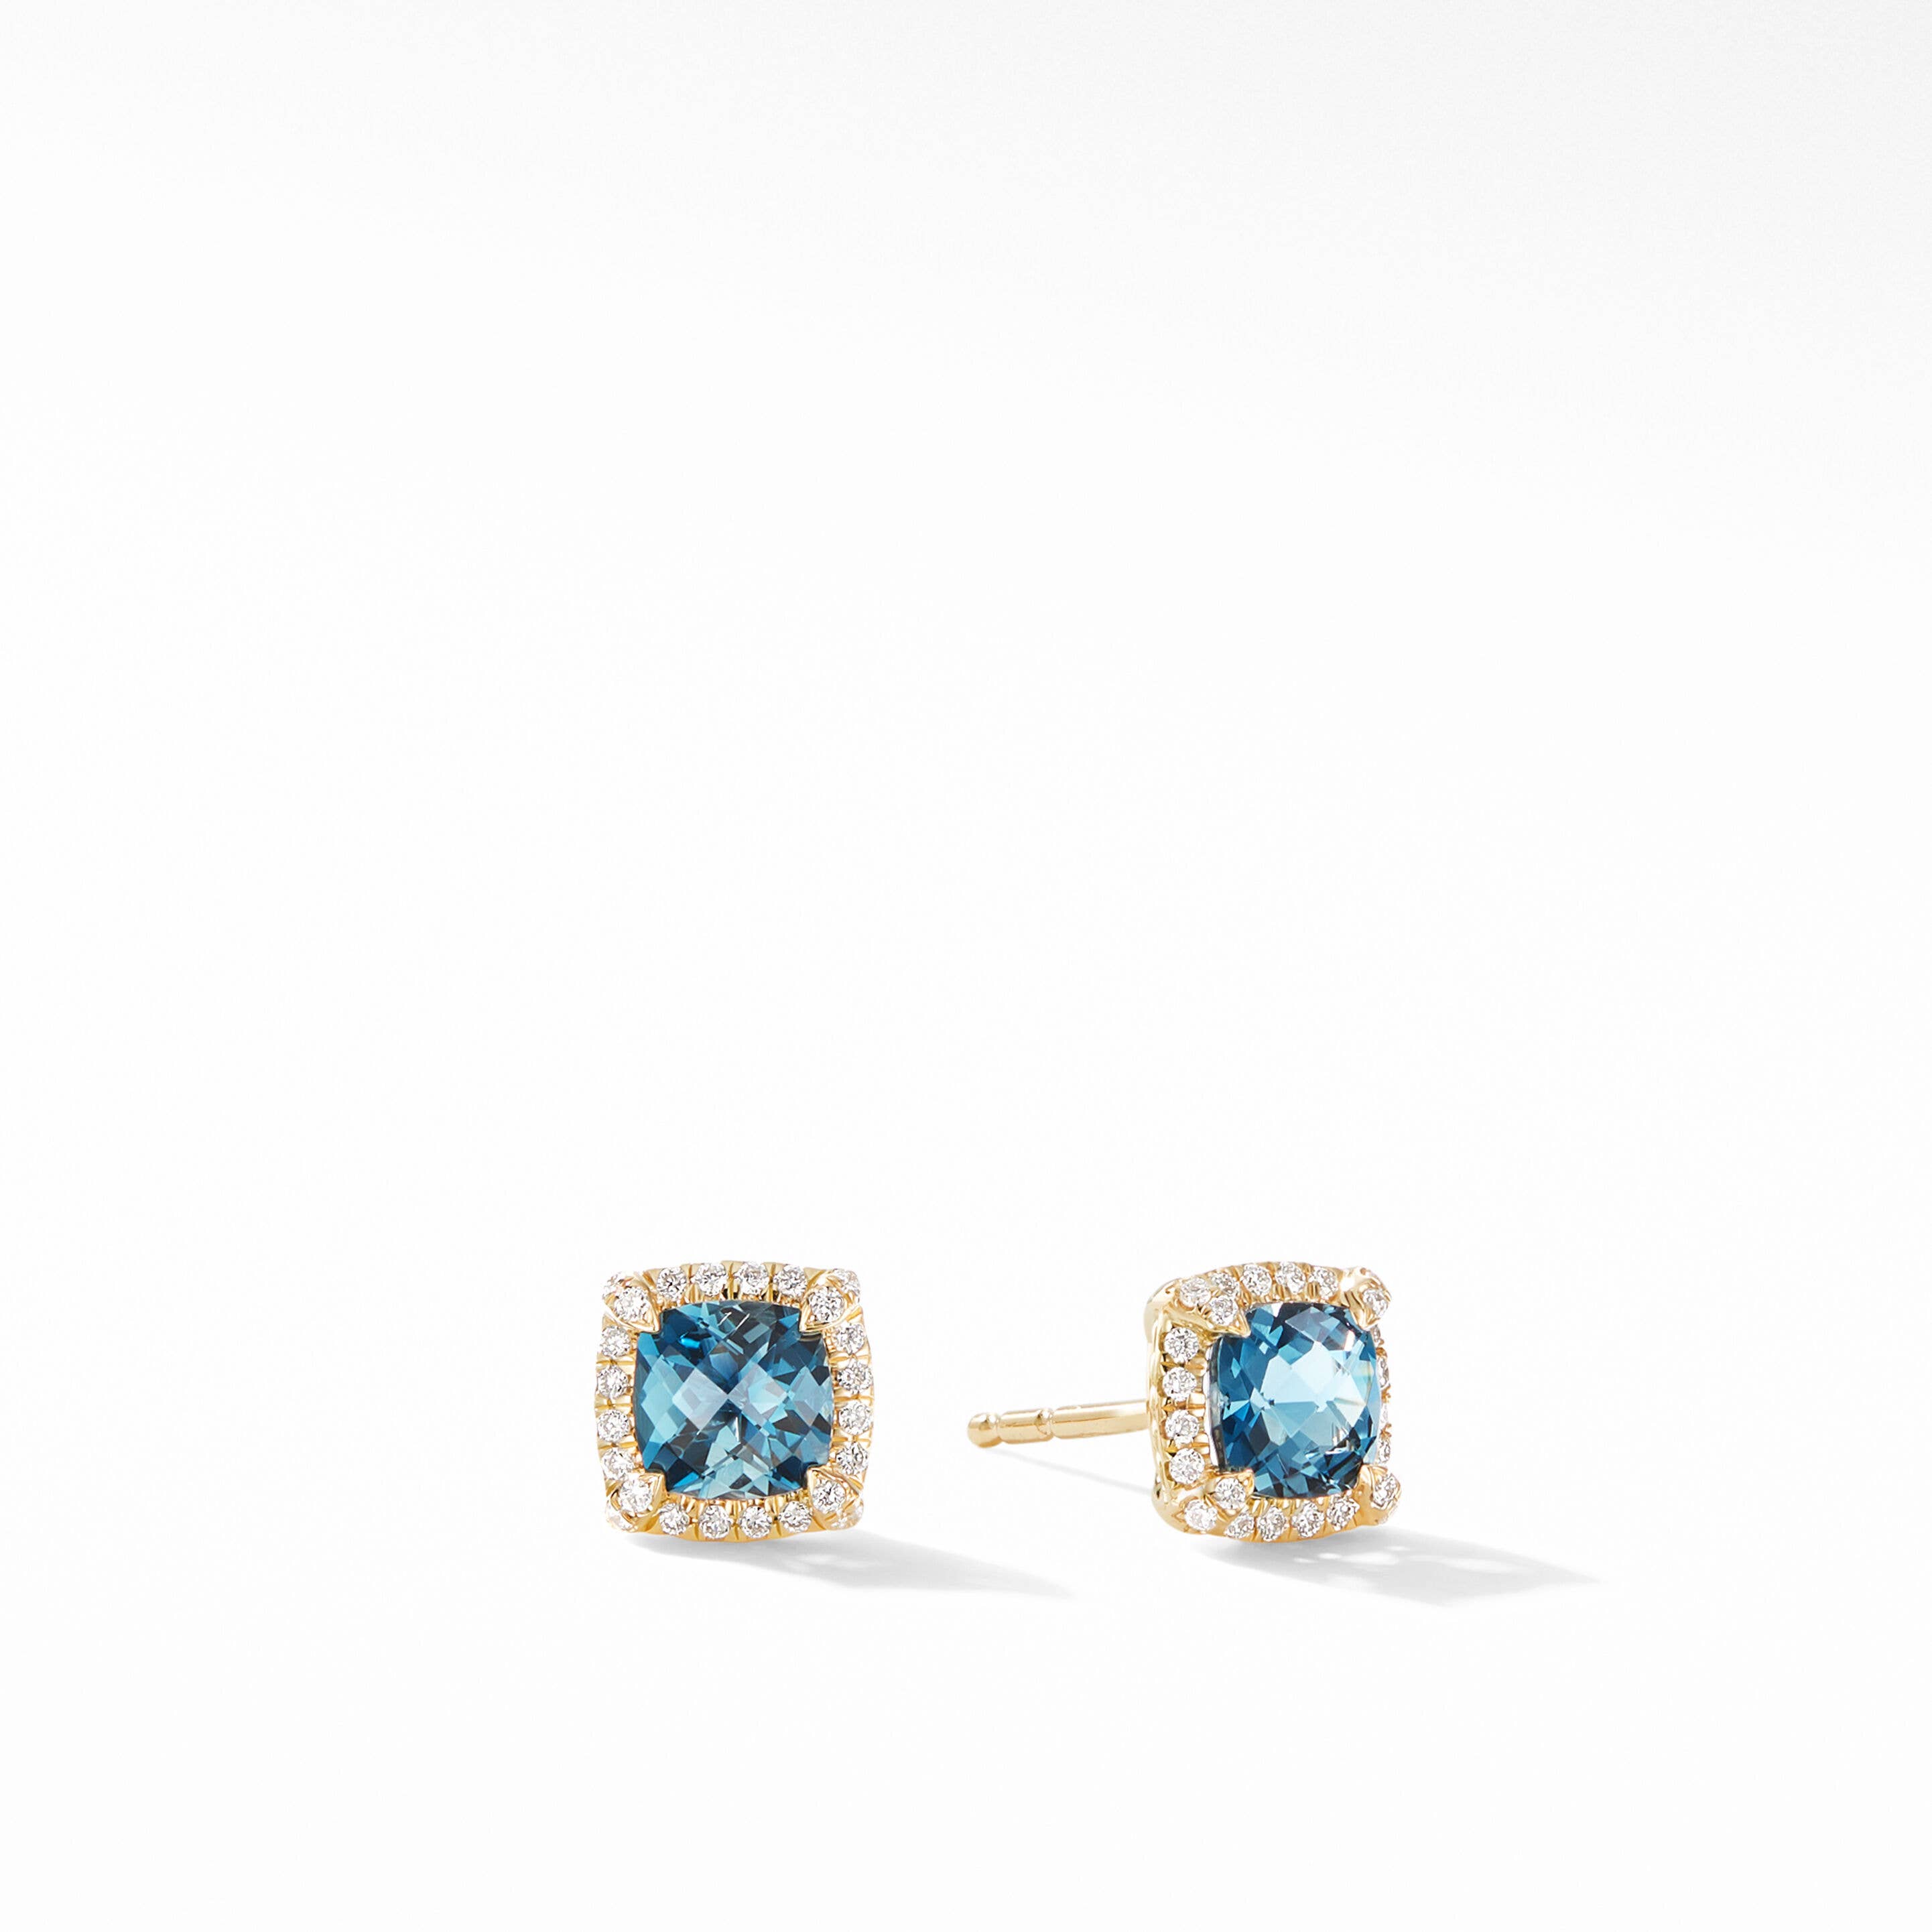 Petite Chatelaine® Pavé Bezel Stud Earrings in 18K Yellow Gold with Hampton Blue Topaz and Diamonds